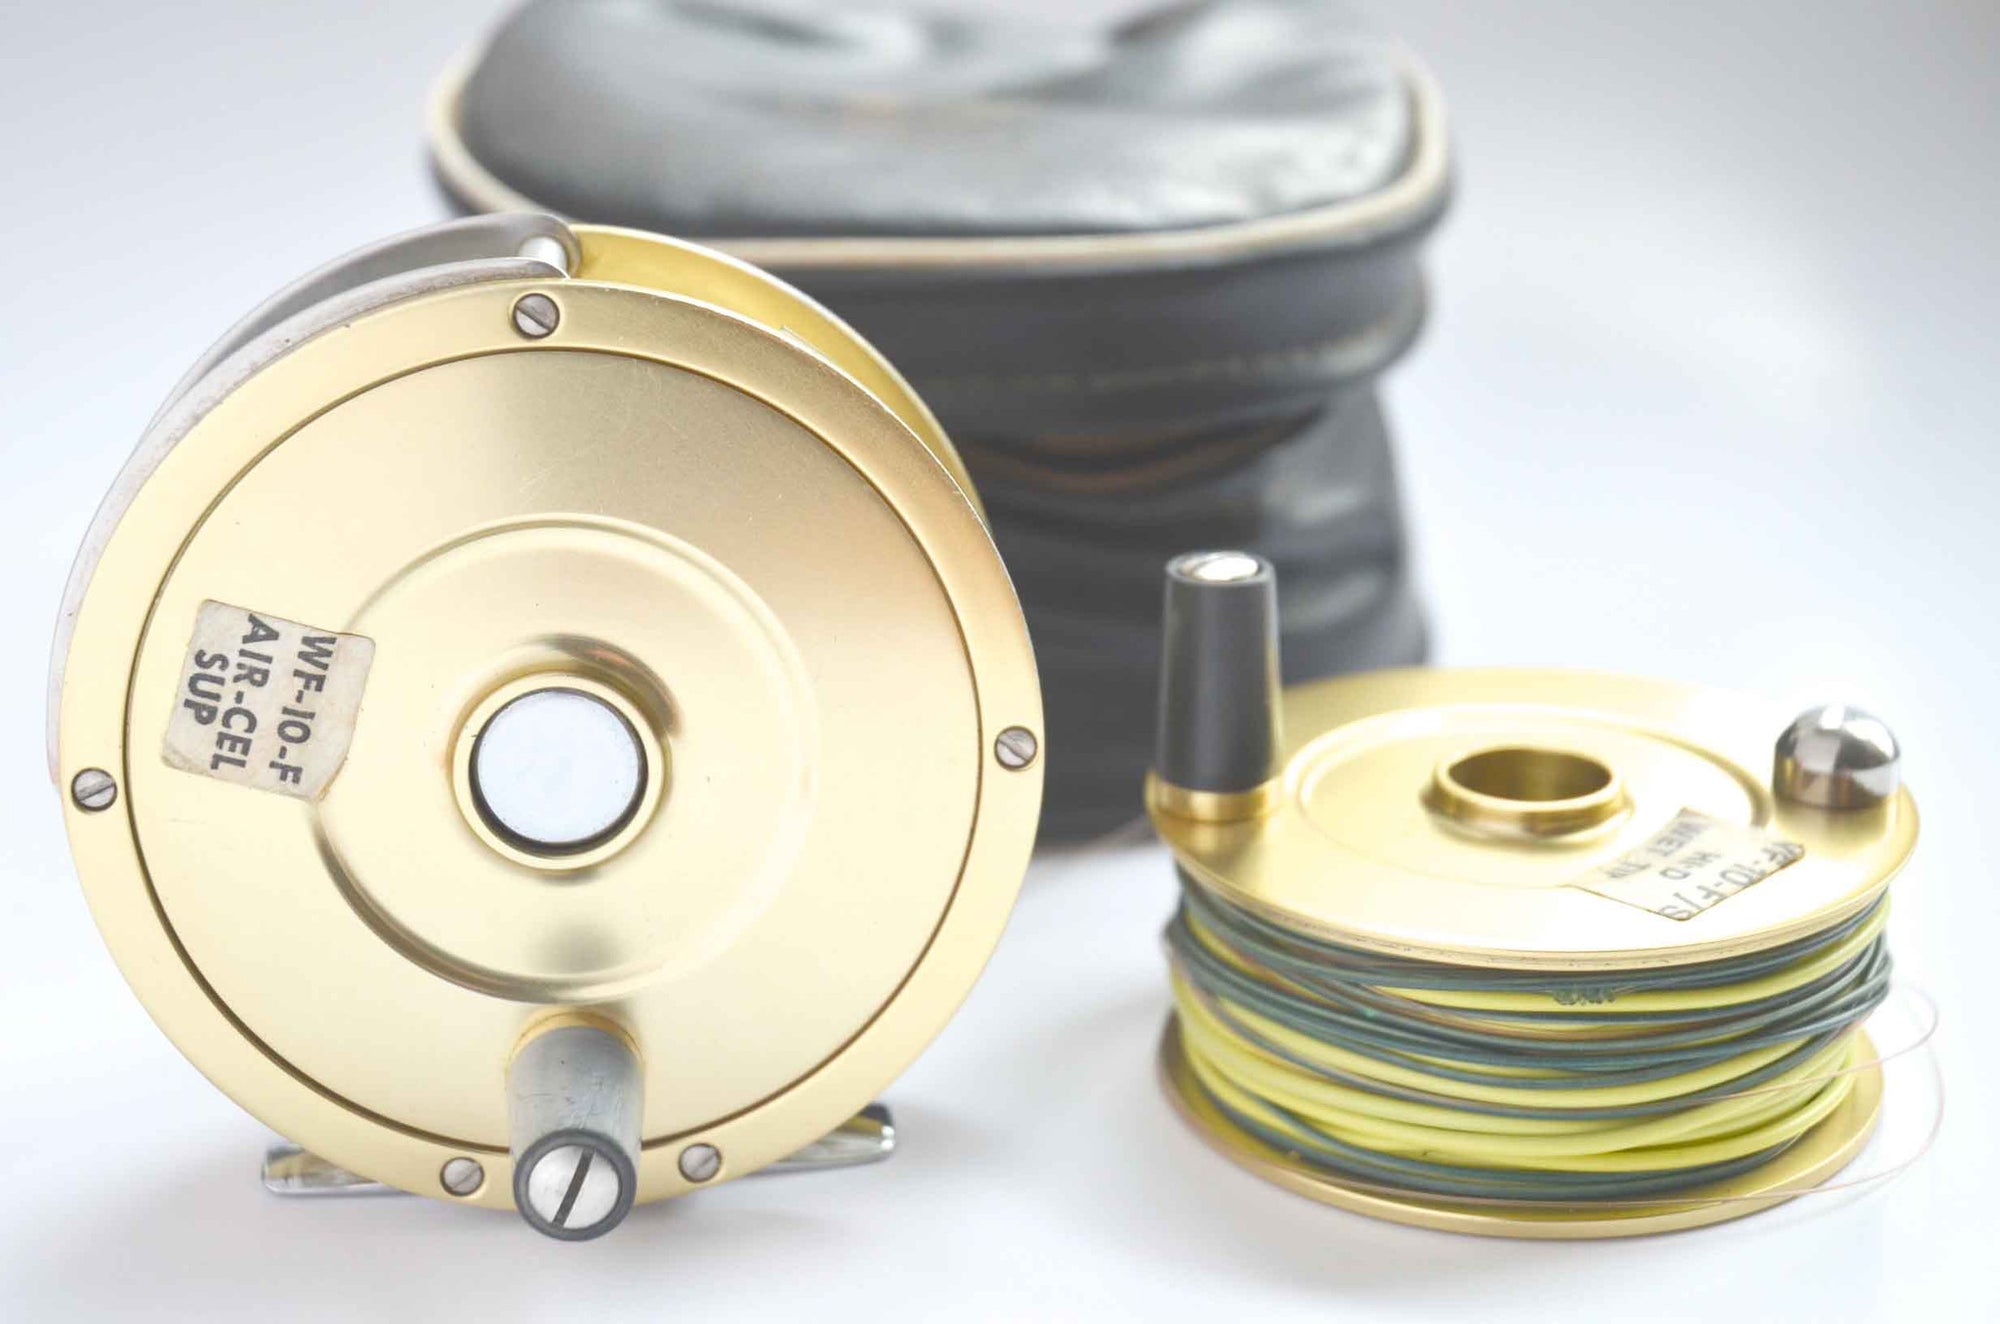 Spinoza Rod Company - A nice Fin-Nor #2 direct drive fly reel. 3 1/8  diameter with a 1 spool width. Right-hand retrieve. Weighs 10.75 oz.  Excellent+ condition with very minor marks on